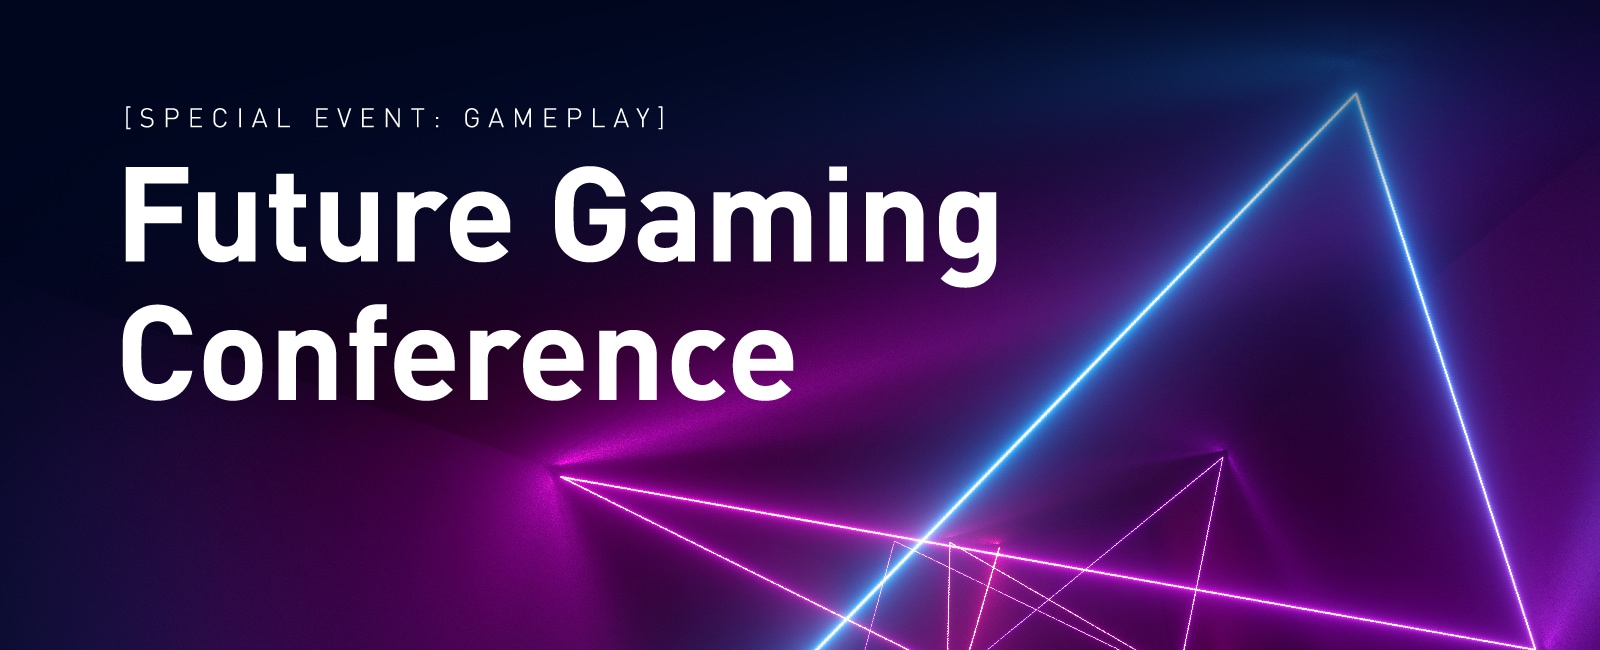 Future gaming conference